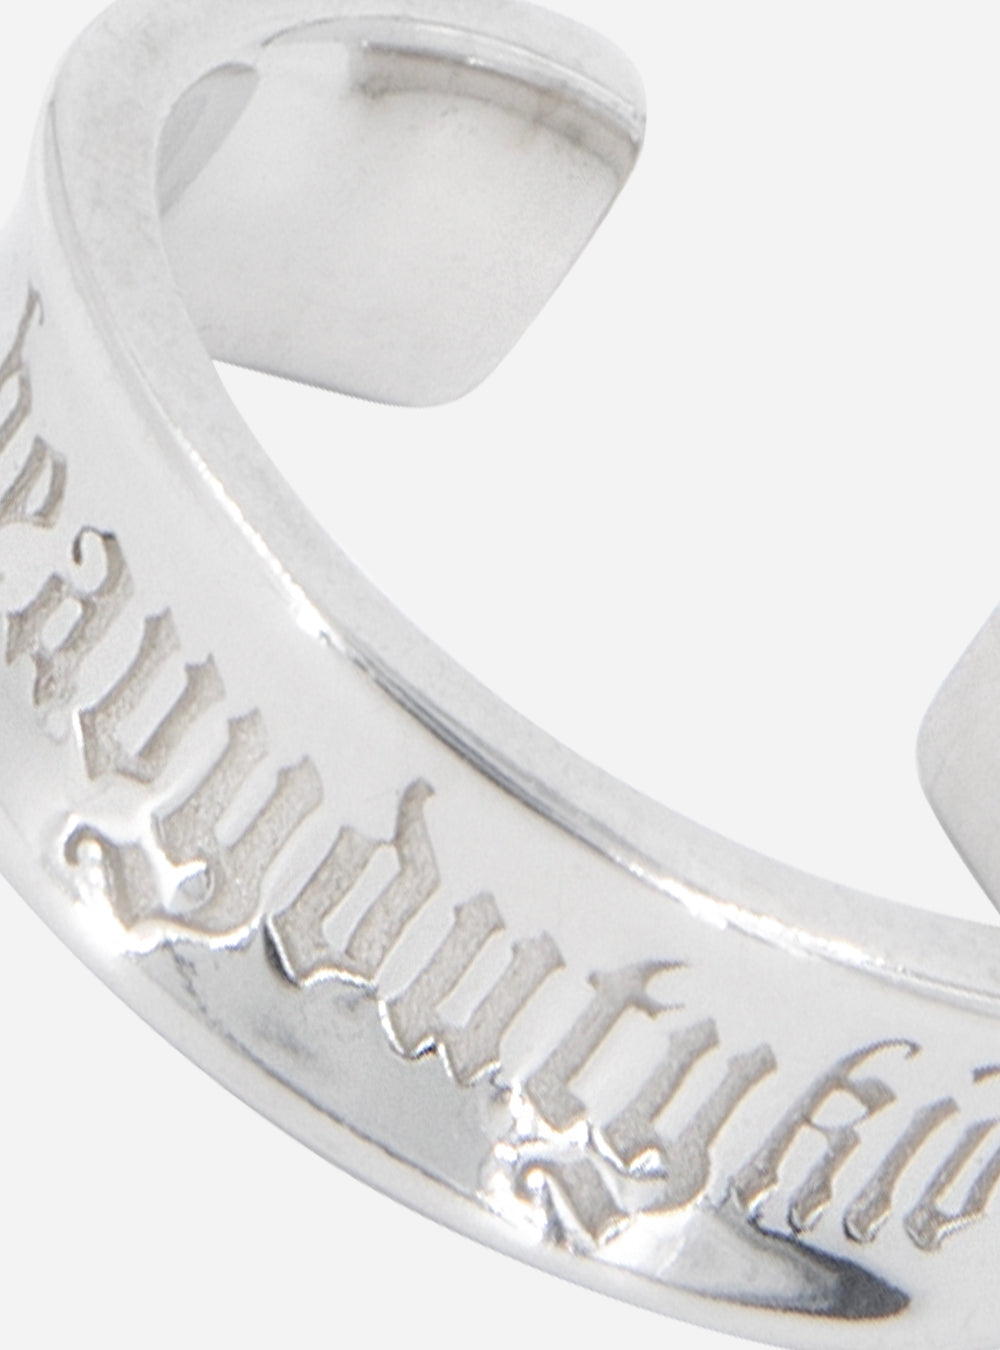 a silver MIDNIGHTFACTORY HEAVYDUTYKID cuff ring with writing on it.